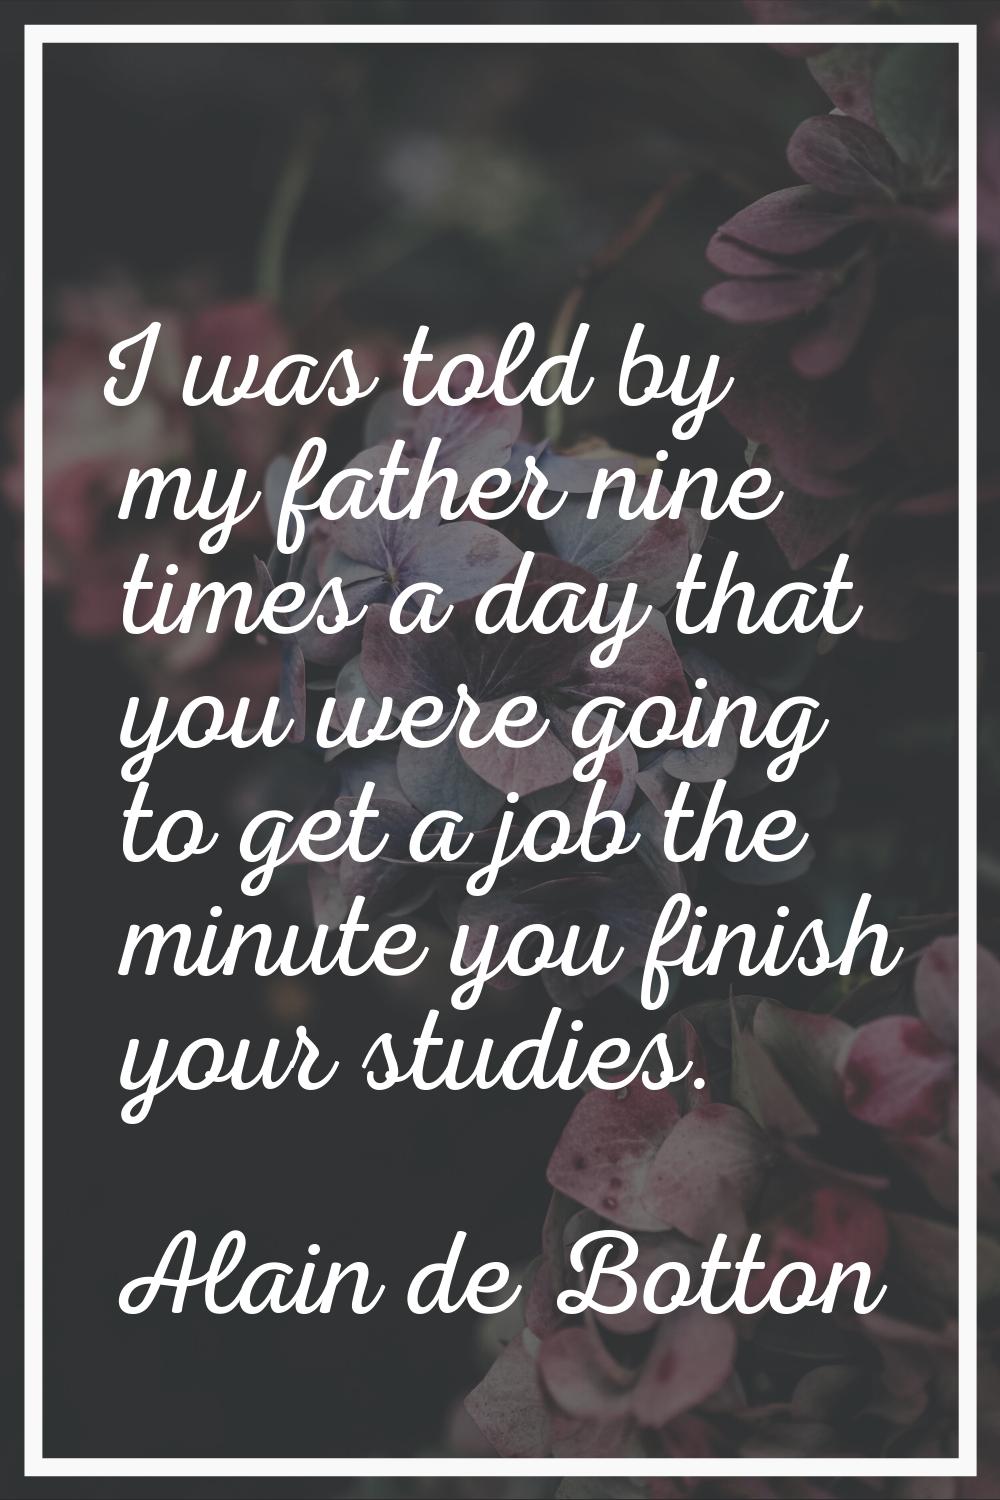 I was told by my father nine times a day that you were going to get a job the minute you finish you